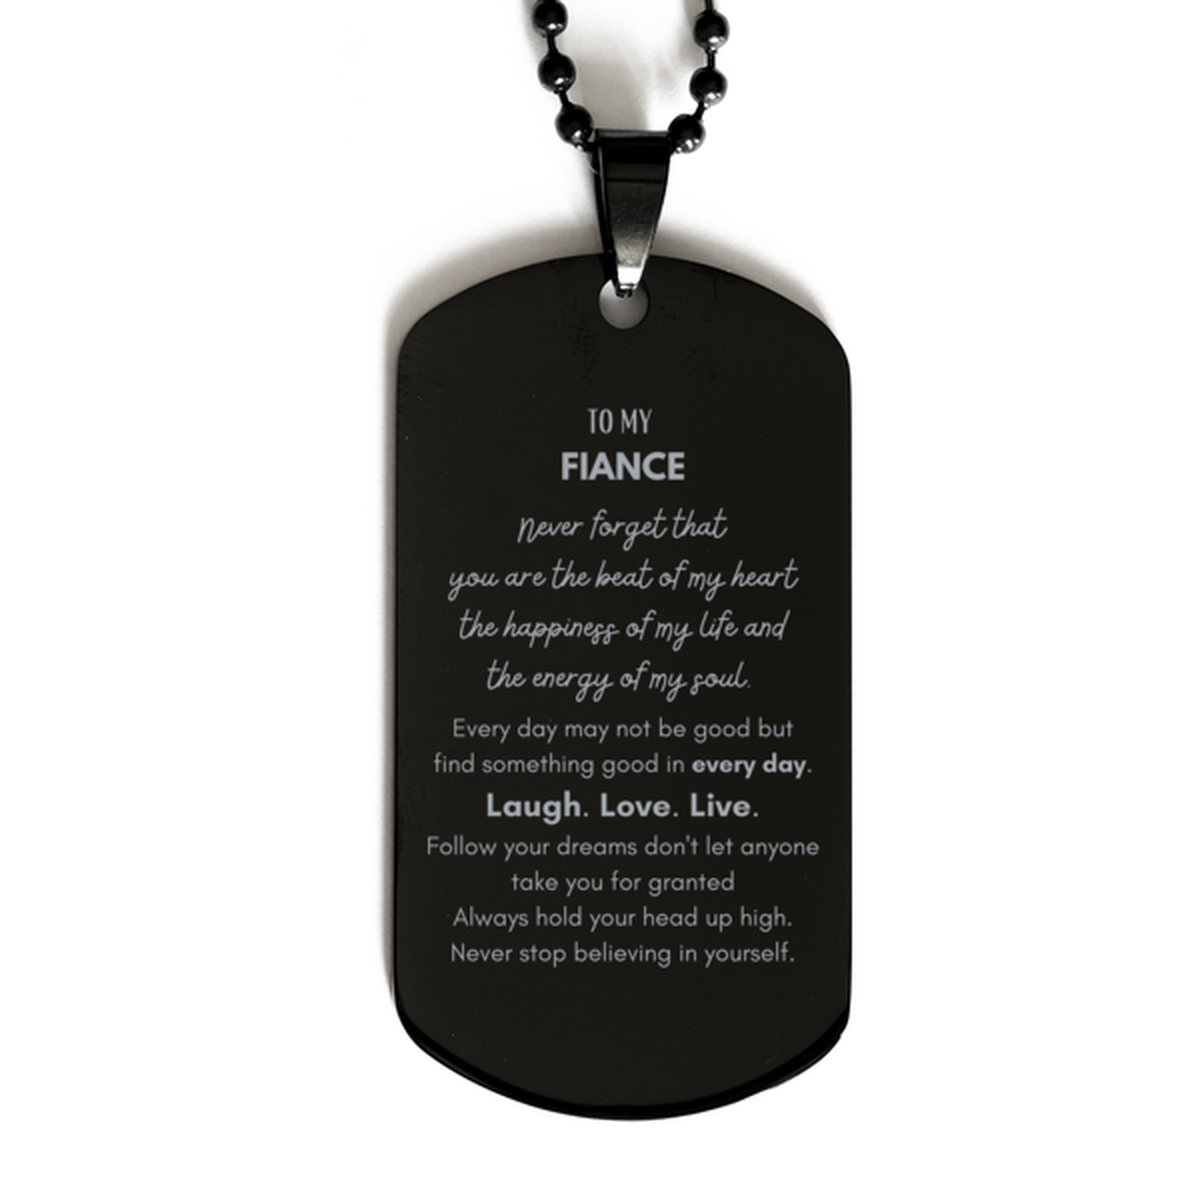 To My Fiance Dogtag Gifts, Christmas Fiance Black Dog Tag Present, Birthday Unique Motivational For Fiance, To My Fiance Never forget that you are the beat of my heart the happiness of my life and the energy of my soul